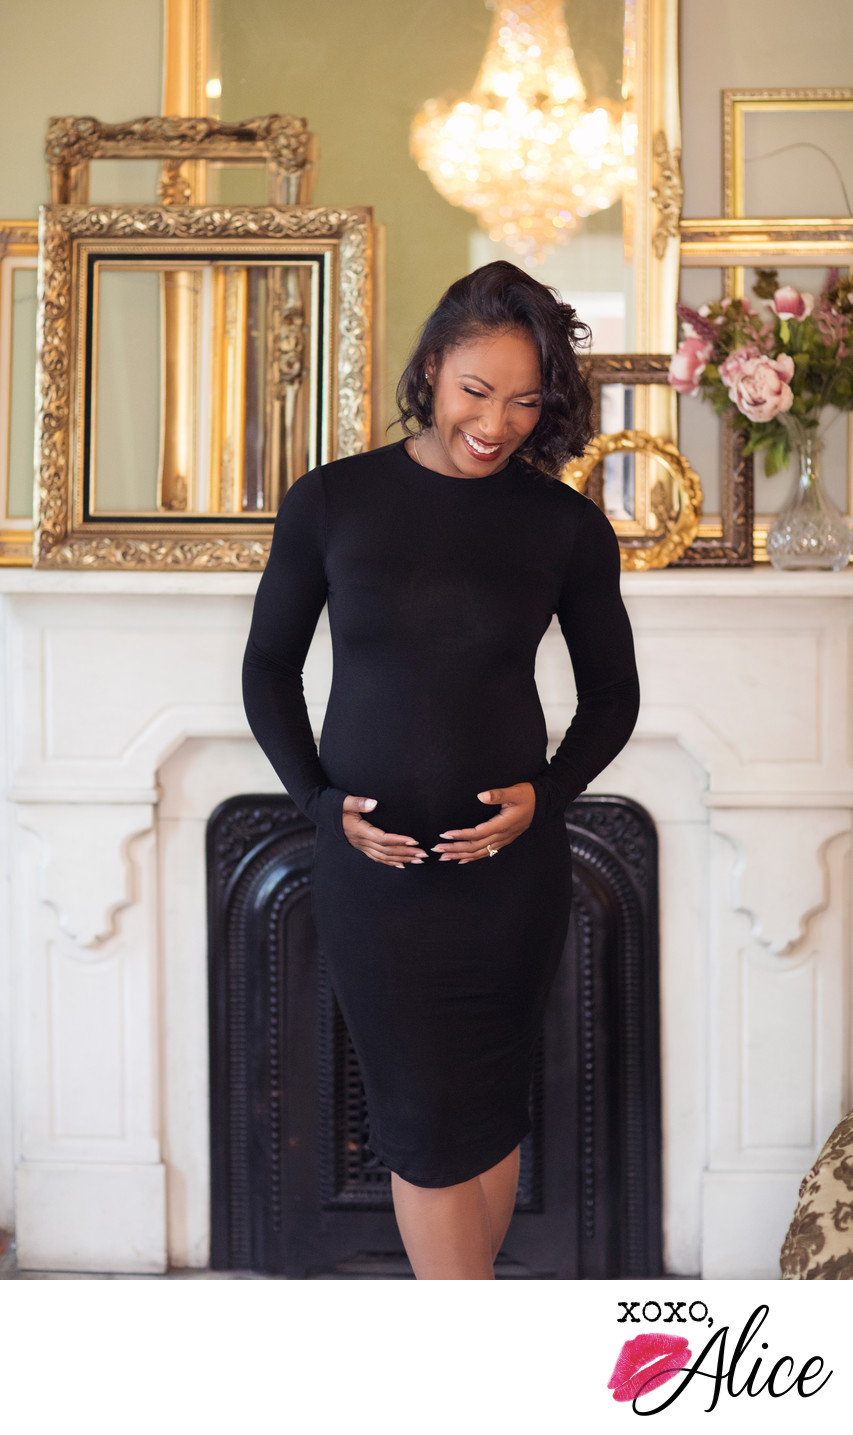 laughing expectant mother luxury studio photography